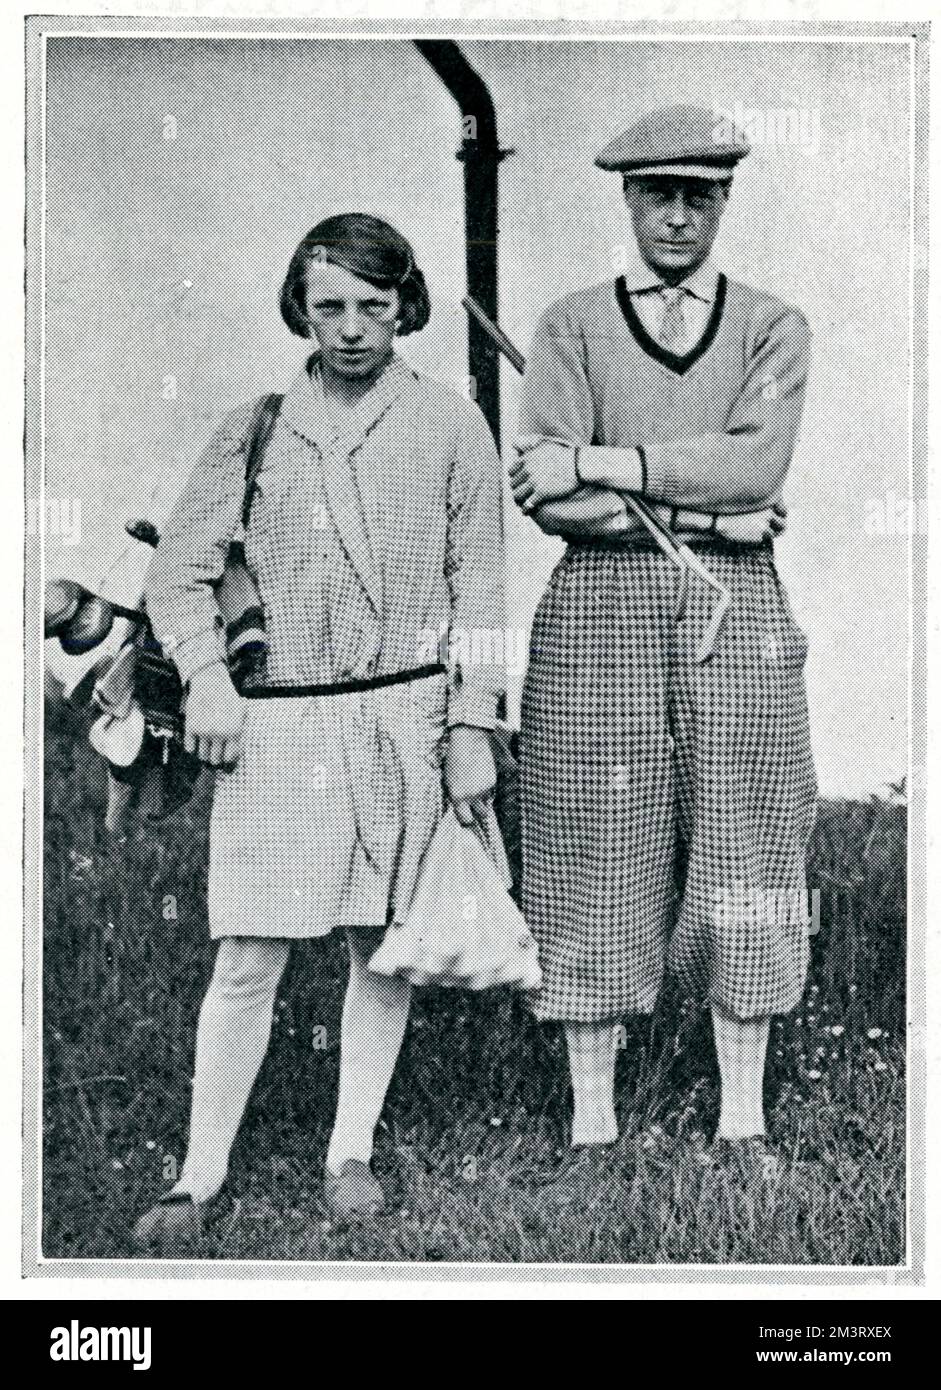 The Prince of Wales, later King Edward VIII, then Duke of Windsor, pictured at fashionable French resort, Le Touquet in 1930 with his favourite girl caddy, Adolphine Lamour.  Le Touquet's golf course was famous for employing young, female caddies.   On this occasion the Prince took part in the Turf Club handicap tournament, in which he was beaten by Colonel R. E. Myddelton, of Chrik Castle, North Wales.        Date: 1930 Stock Photo